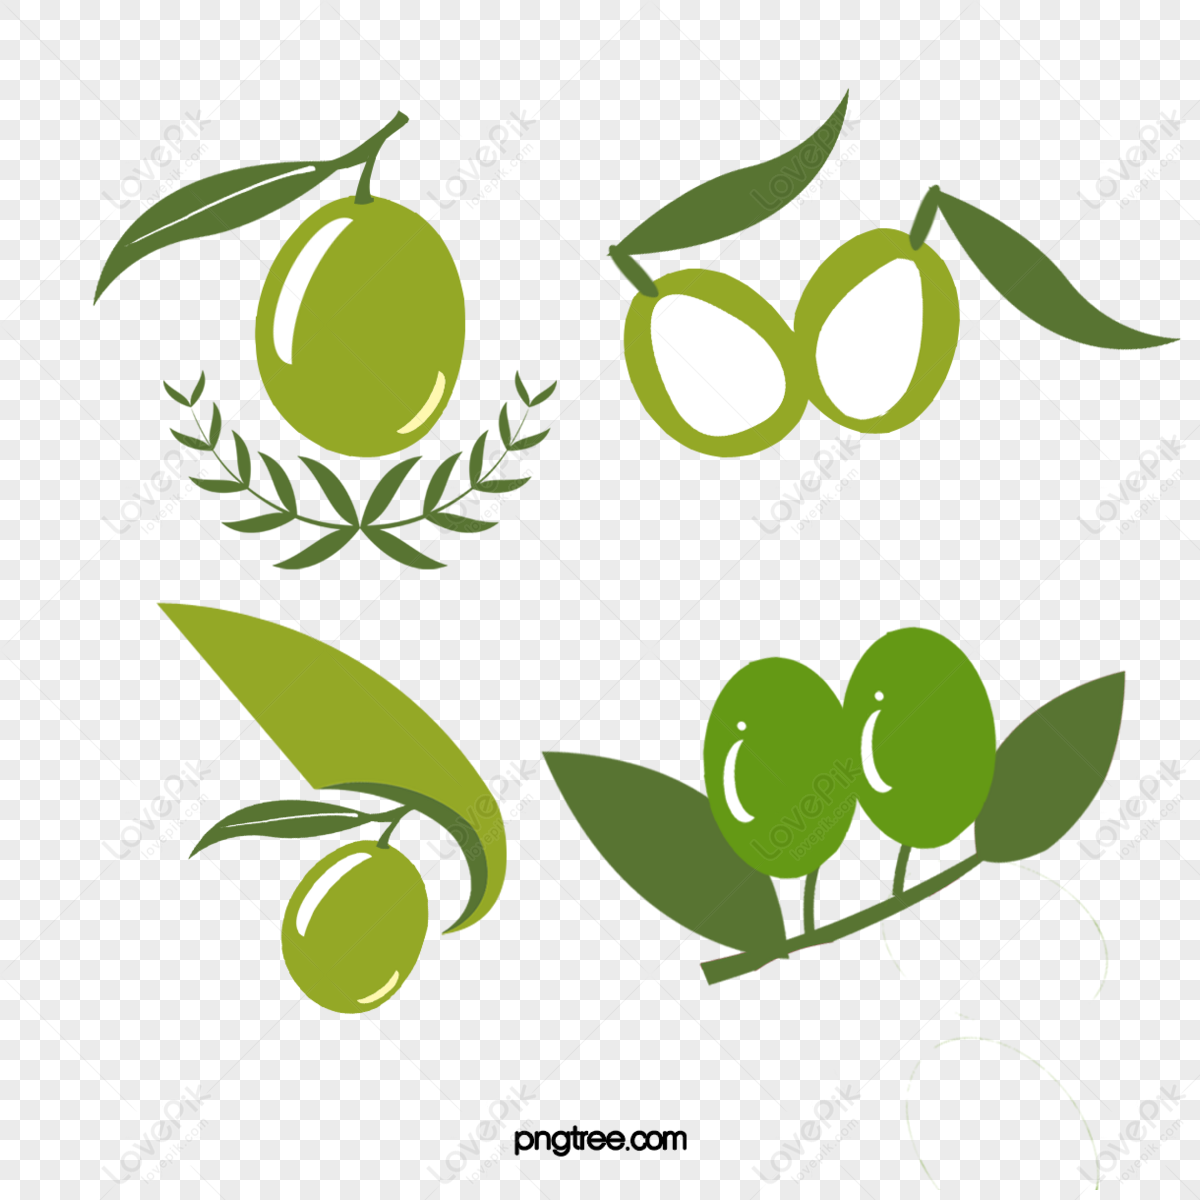 Olive logo template icon design Royalty Free Vector Image